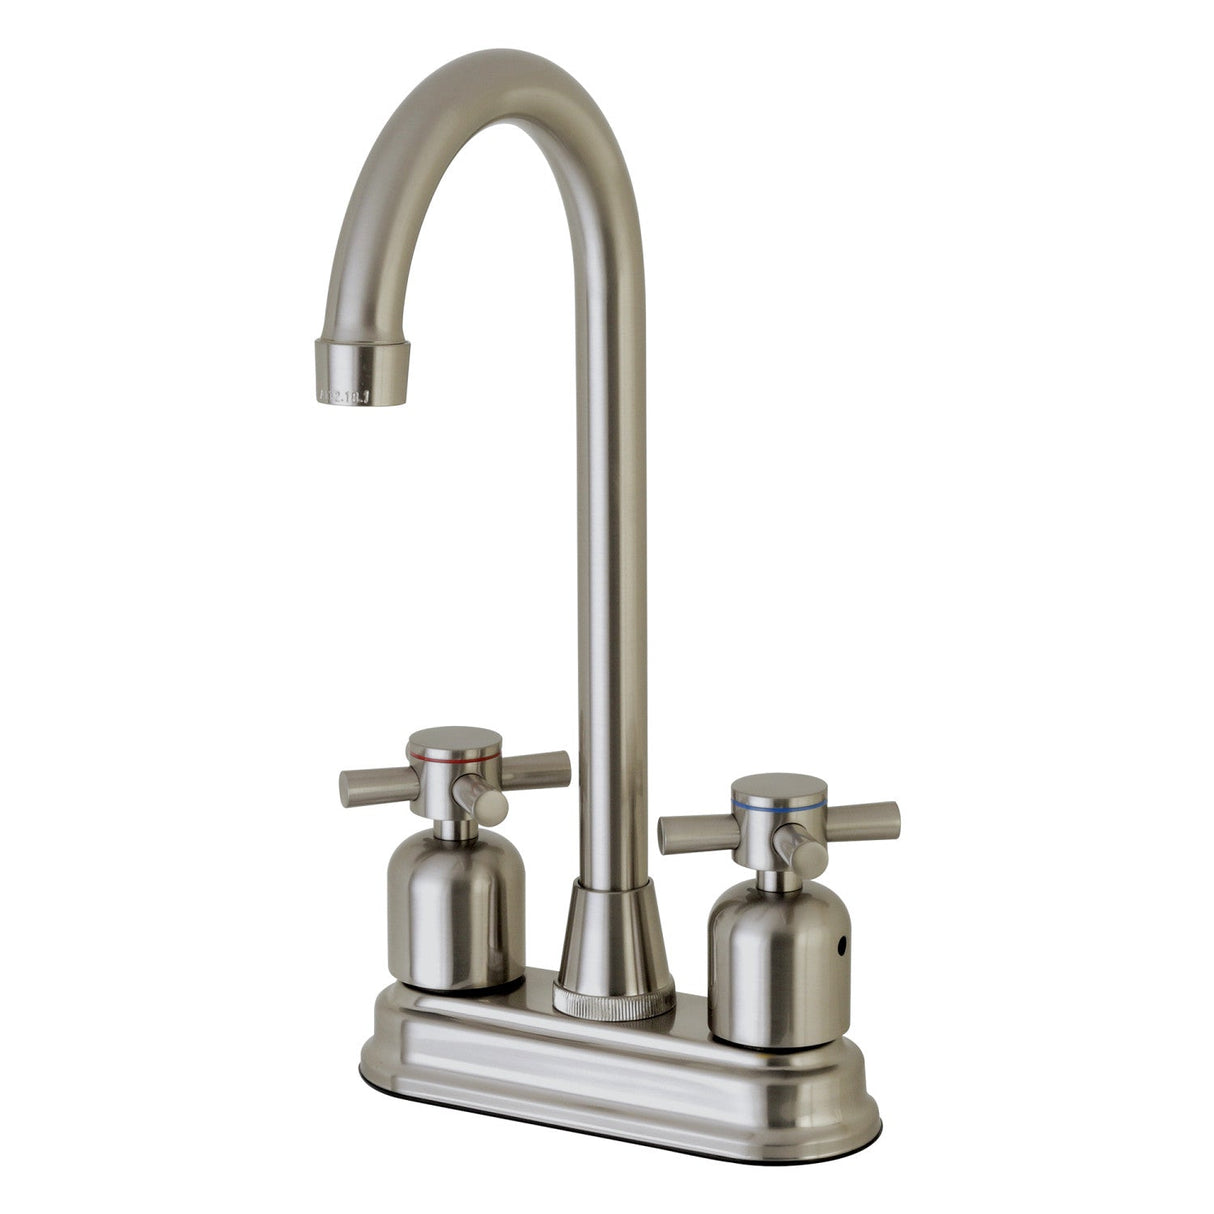 Concord FB498DX Two-Handle 2-Hole Deck Mount Bar Faucet, Brushed Nickel